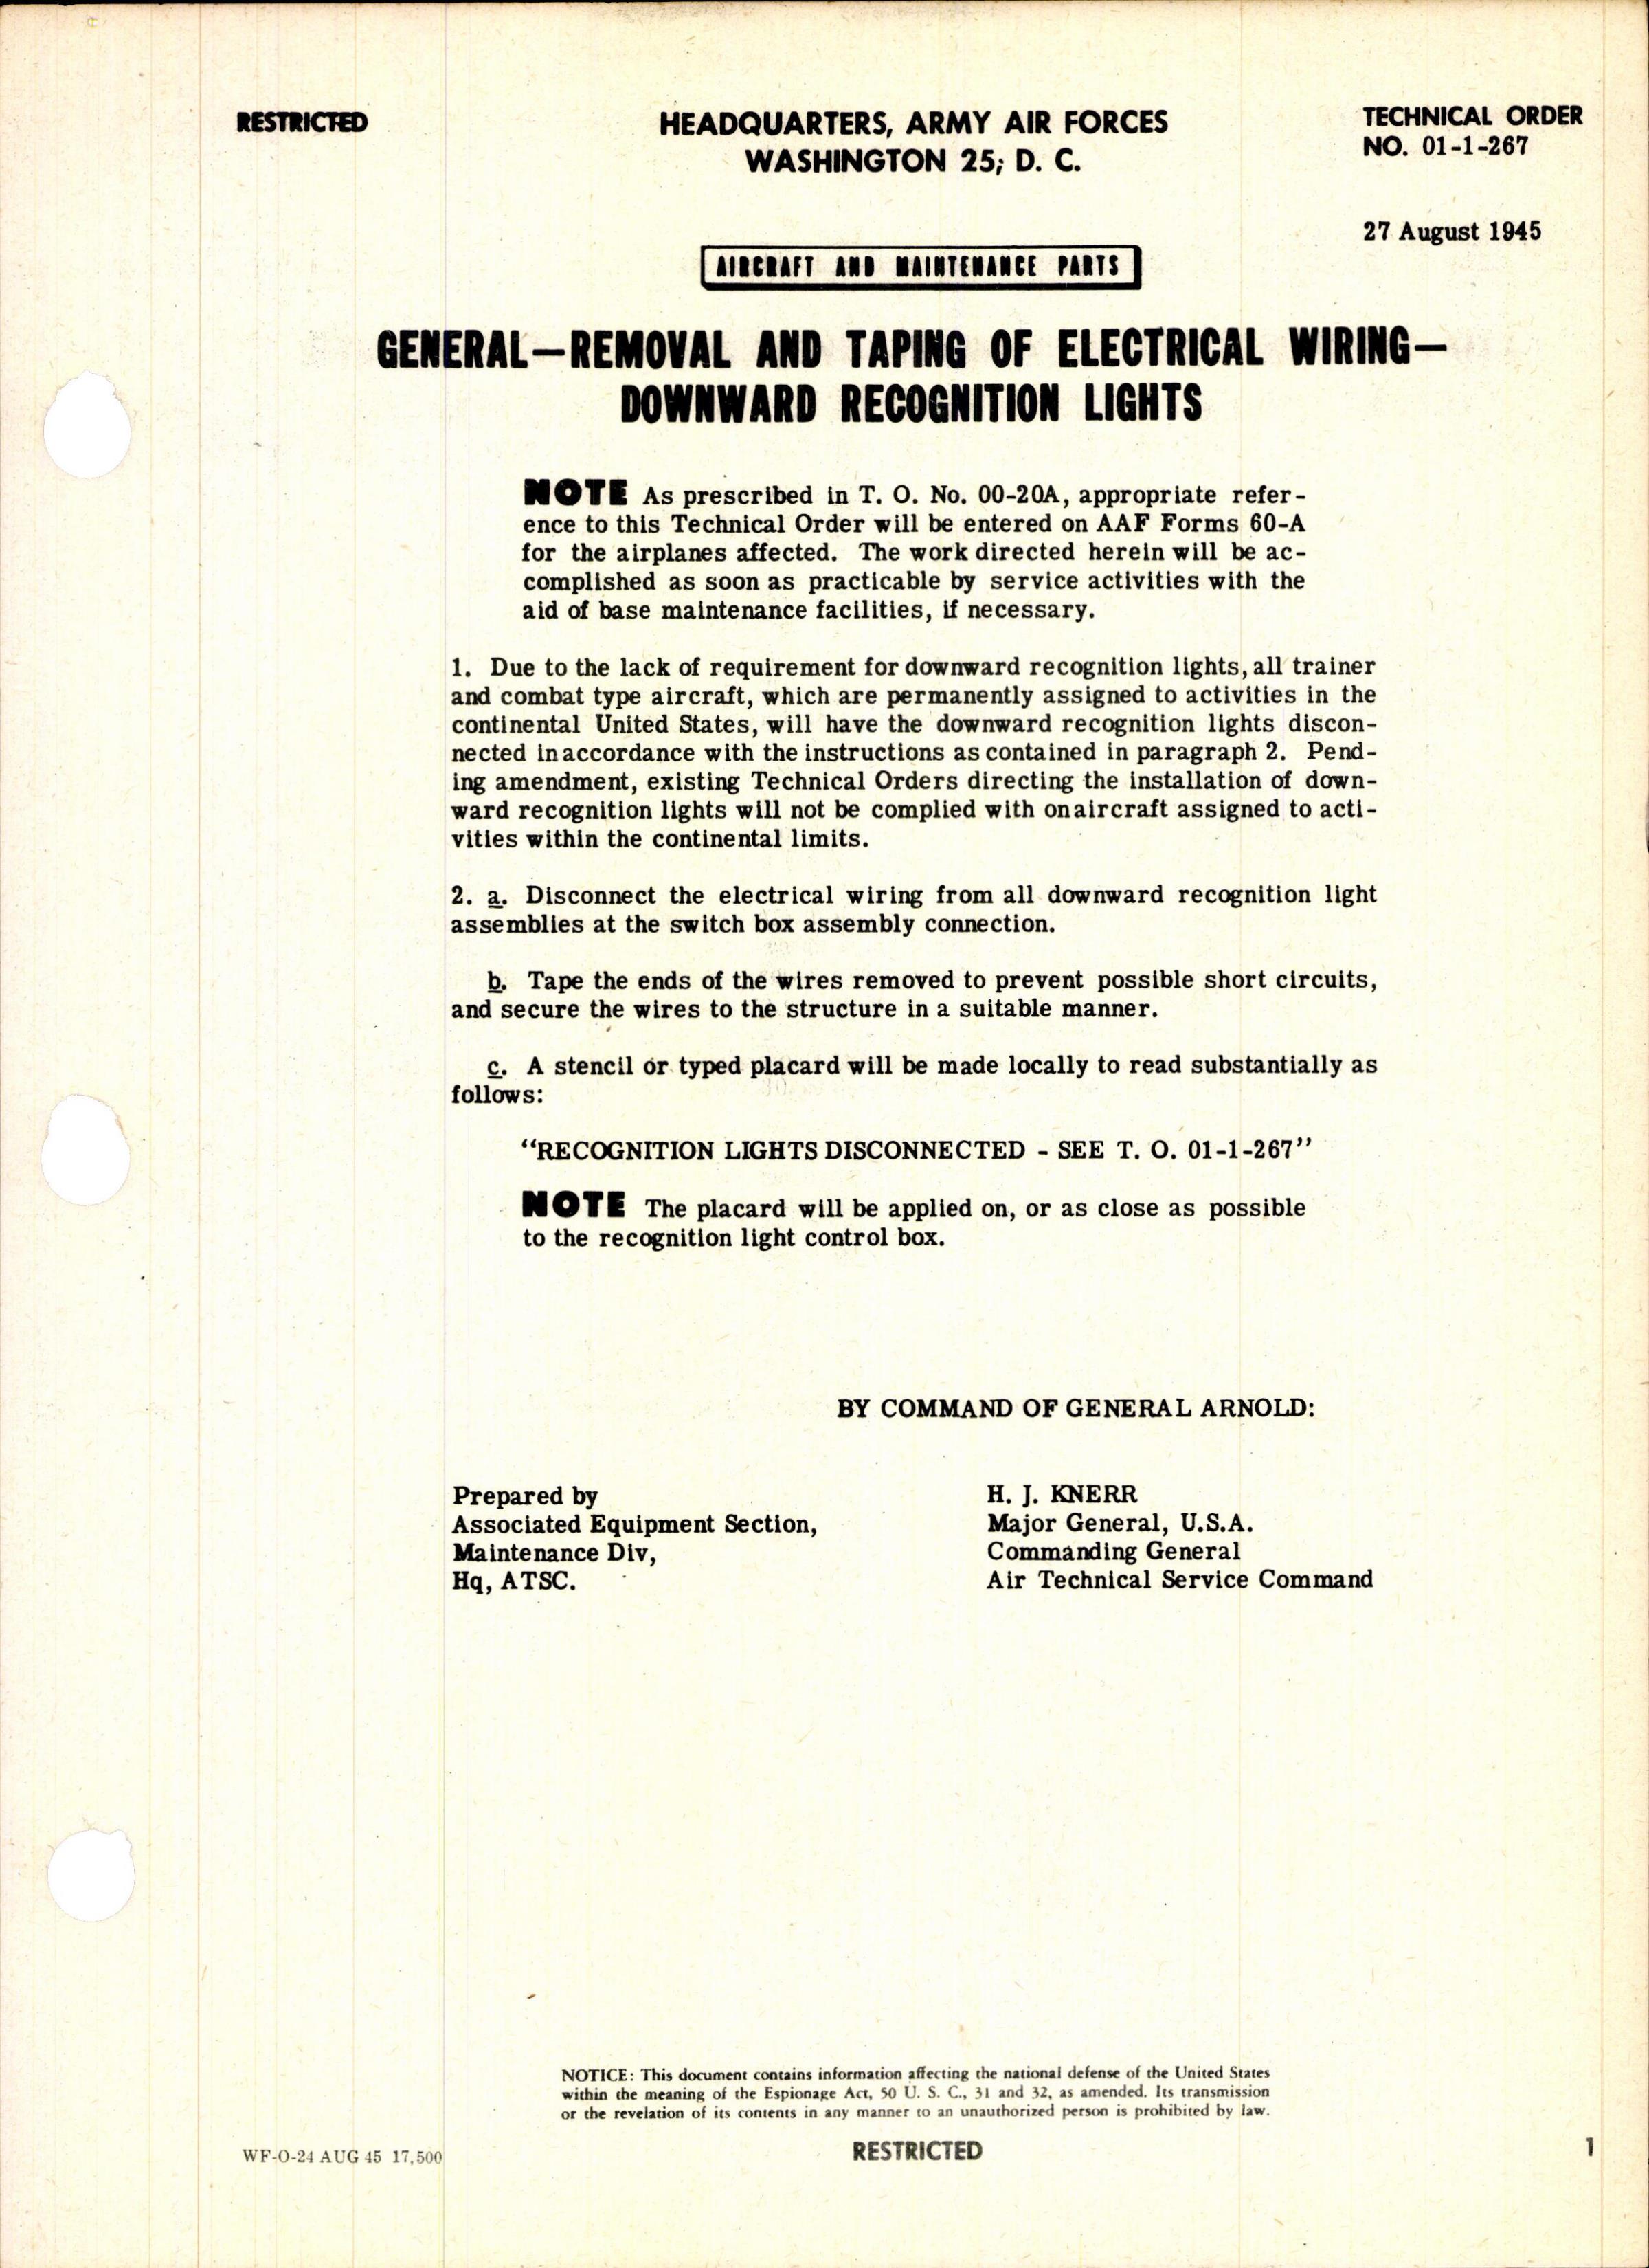 Sample page 1 from AirCorps Library document: Removal and Taping of Electrical Wiring for Downward Recognition Lights